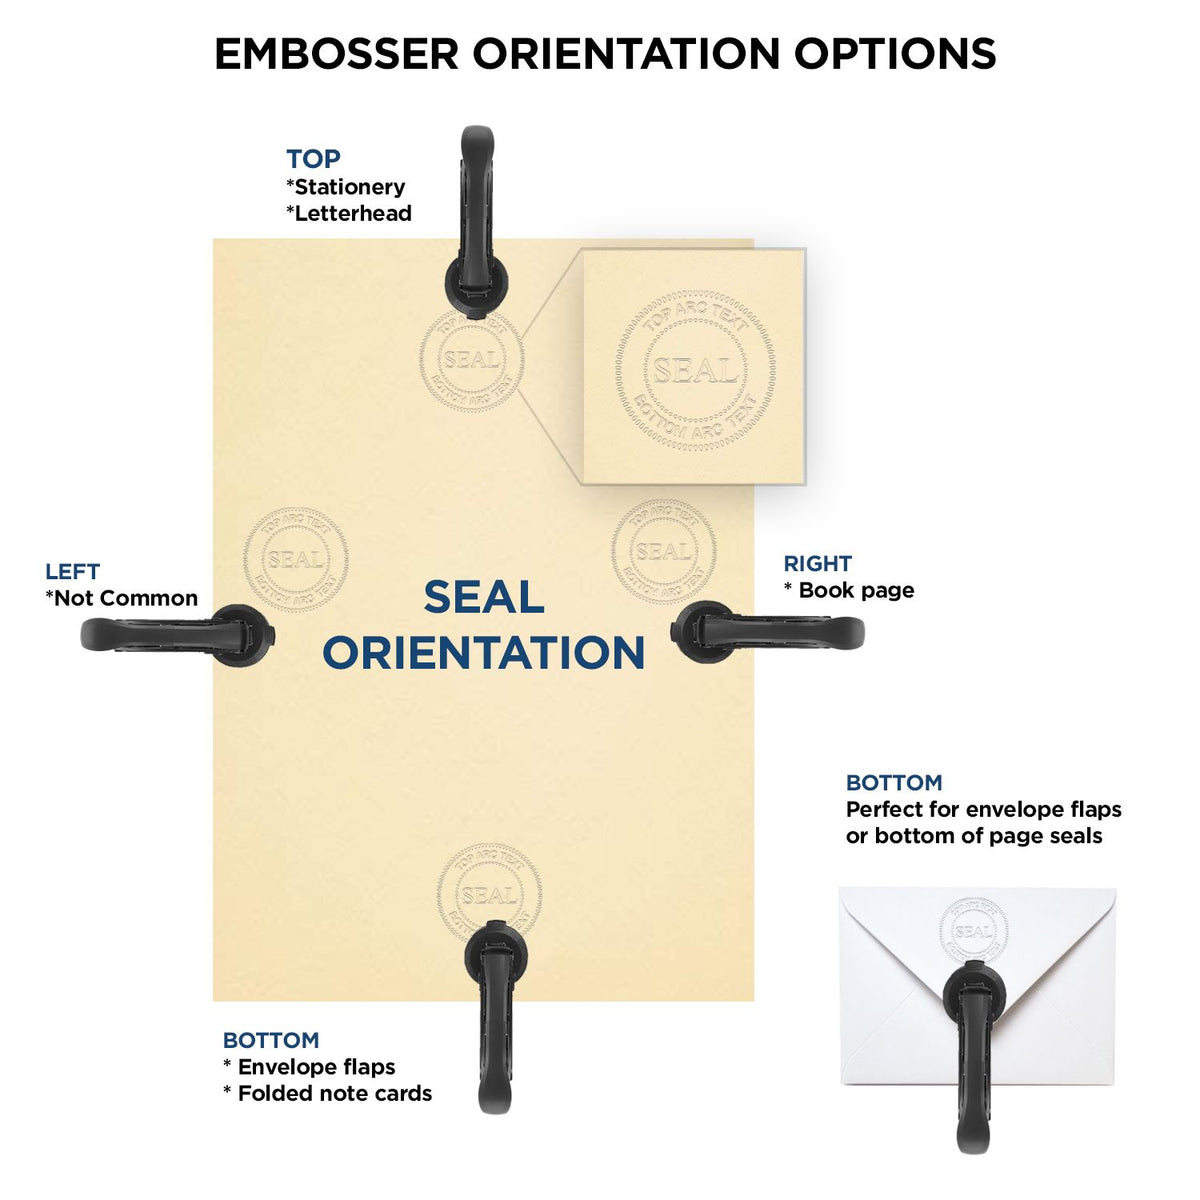 An infographic for the State of Iowa Long Reach Architectural Embossing Seal showing embosser orientation, this is showing examples of a top, bottom, right and left insert.